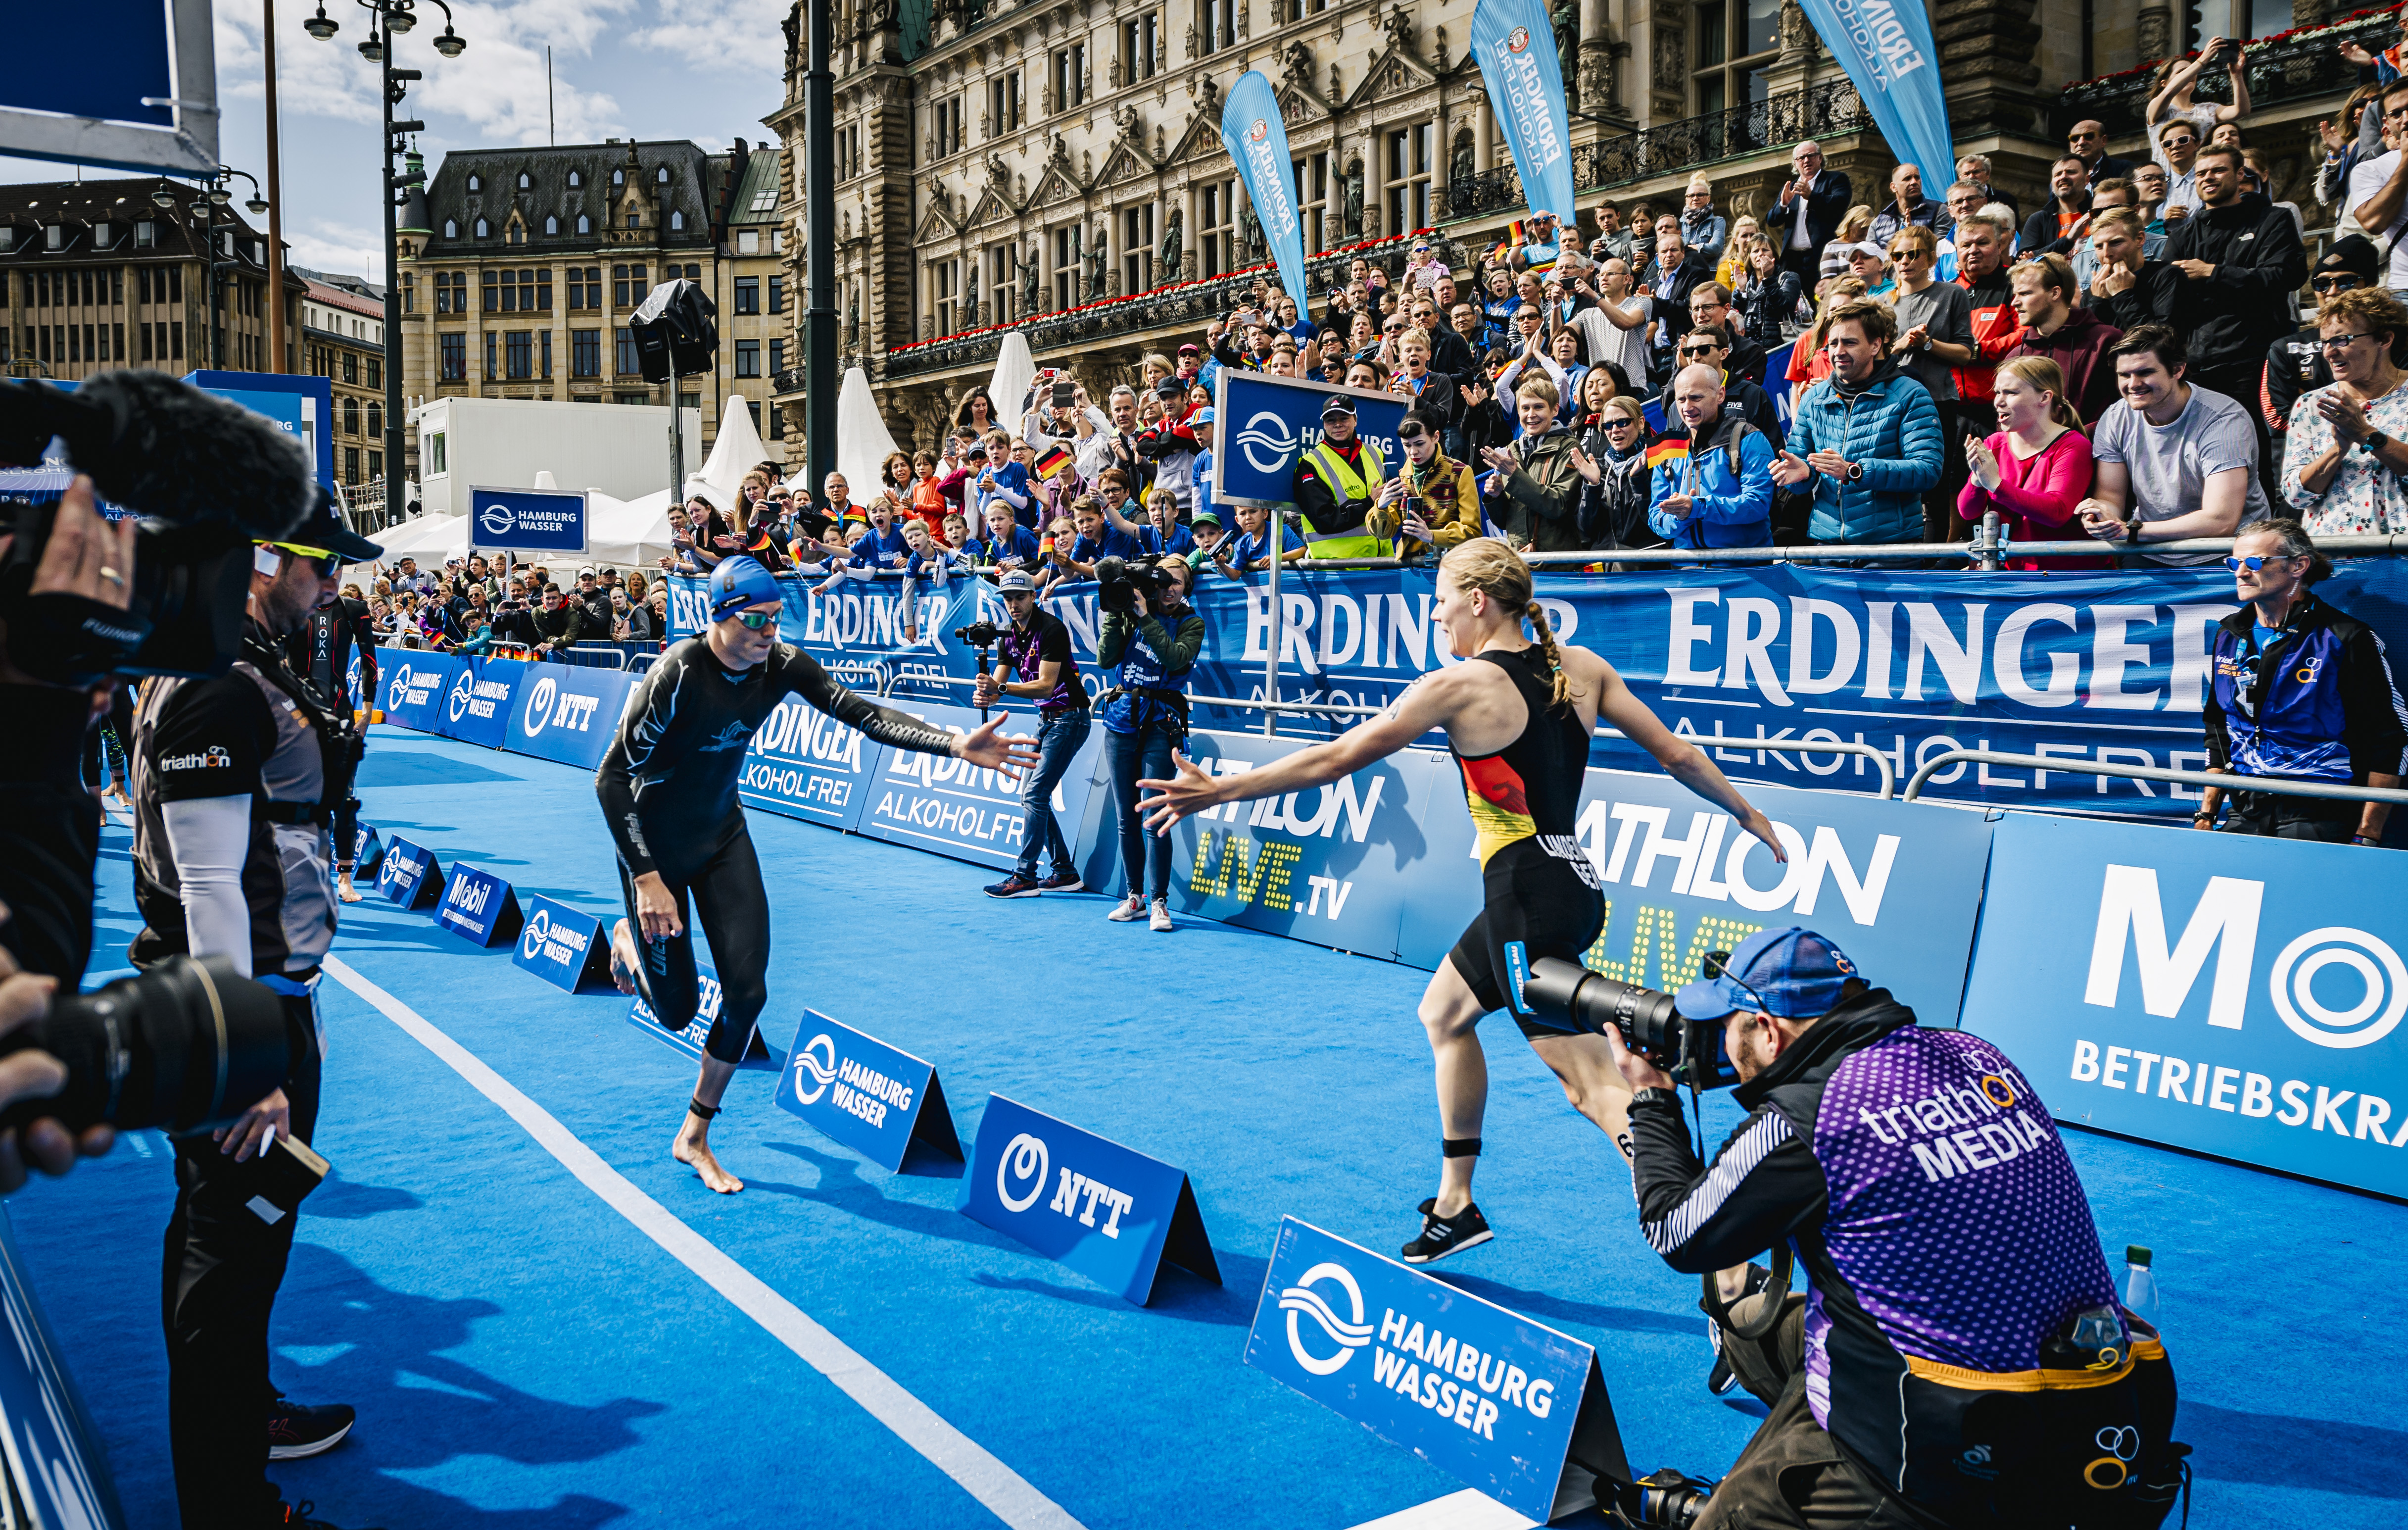 Valentin Wernz of Germany and Laura Lindemann of Germany compete in the ITU World Triathlon Mixed Relay World Championships 2019 in Hamburg. Getty Images.